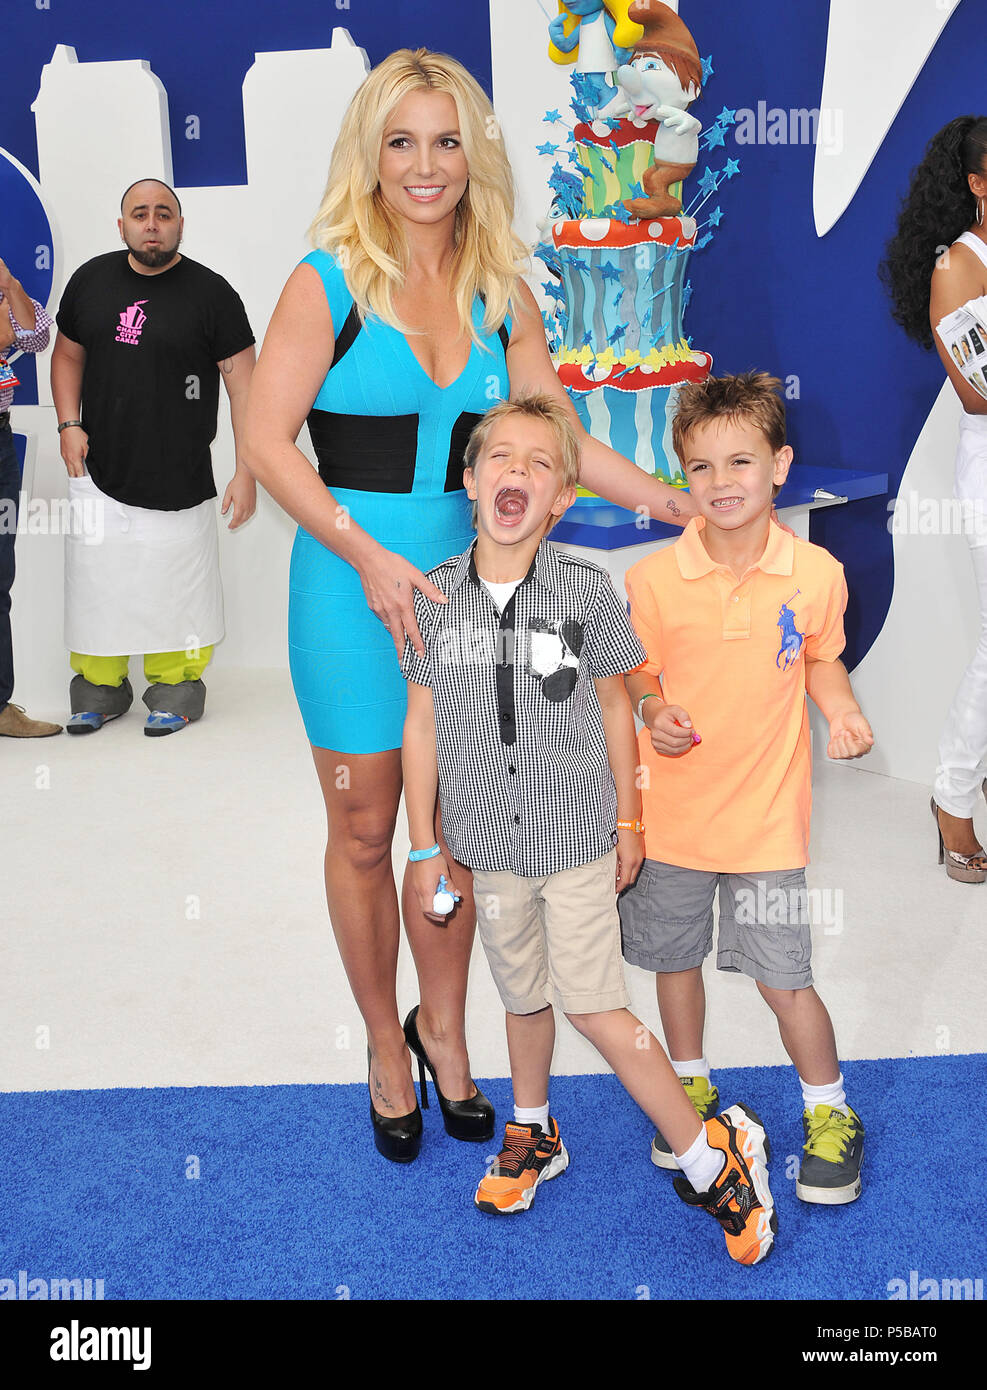 Britney Spears, Jayden James Federline, Sean Federline  at the Smurfs 2 Premiere at the Westwood Village Theatre in Los Angeles.Britney Spears, Jayden James Federline, Sean Federline 014 ------------- Red Carpet Event, Vertical, USA, Film Industry, Celebrities,  Photography, Bestof, Arts Culture and Entertainment, Topix Celebrities fashion /  Vertical, Best of, Event in Hollywood Life - California,  Red Carpet and backstage, USA, Film Industry, Celebrities,  movie celebrities, TV celebrities, Music celebrities, Photography, Bestof, Arts Culture and Entertainment,  Topix, vertical,  family from Stock Photo